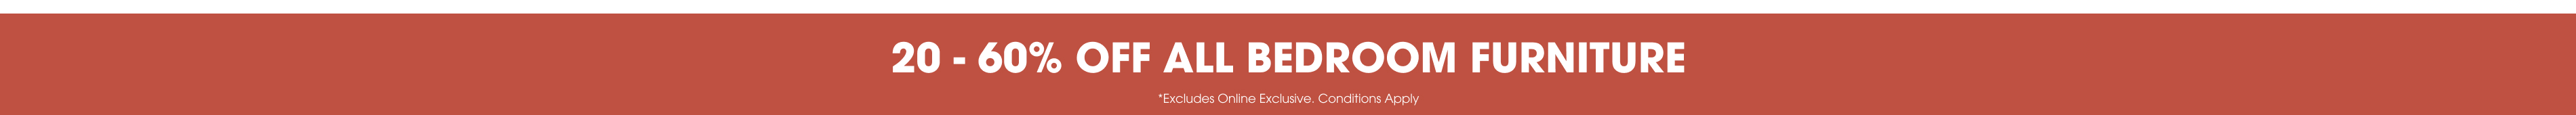 bedroomlonglisterpadded.png